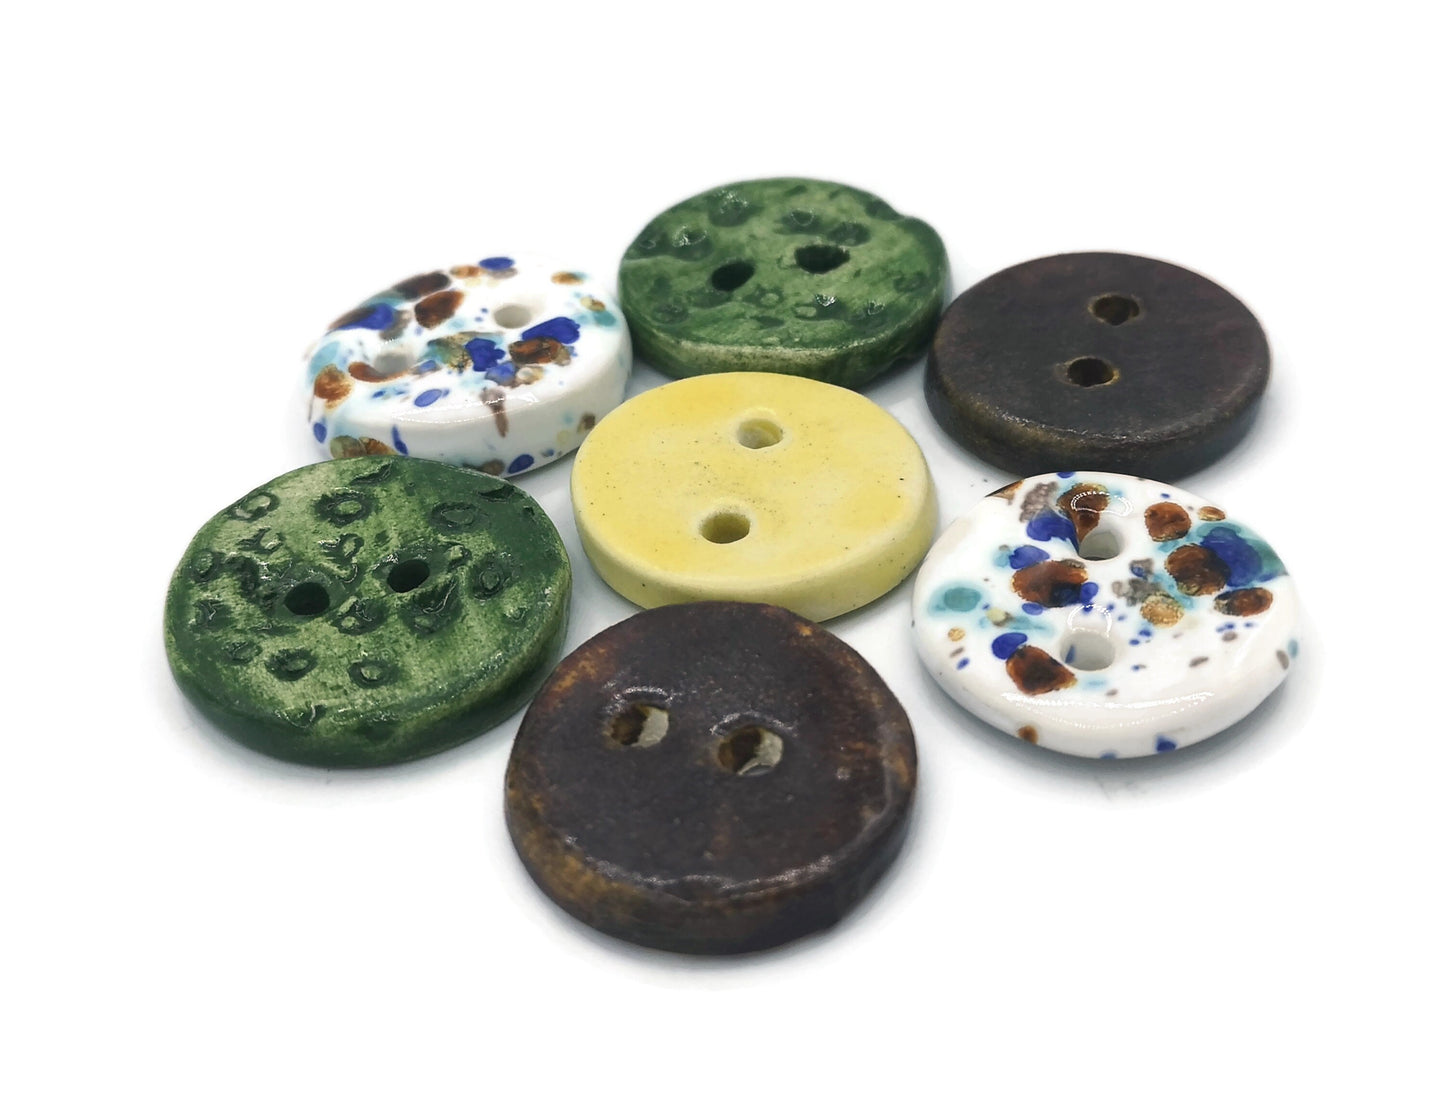 7Pc 30mm Round Buttons Set, Coat buttons, Handmade Ceramic Clothing Finishes Sewing Buttons Lot, Unusual Clay Buttons Hand Painted - Ceramica Ana Rafael